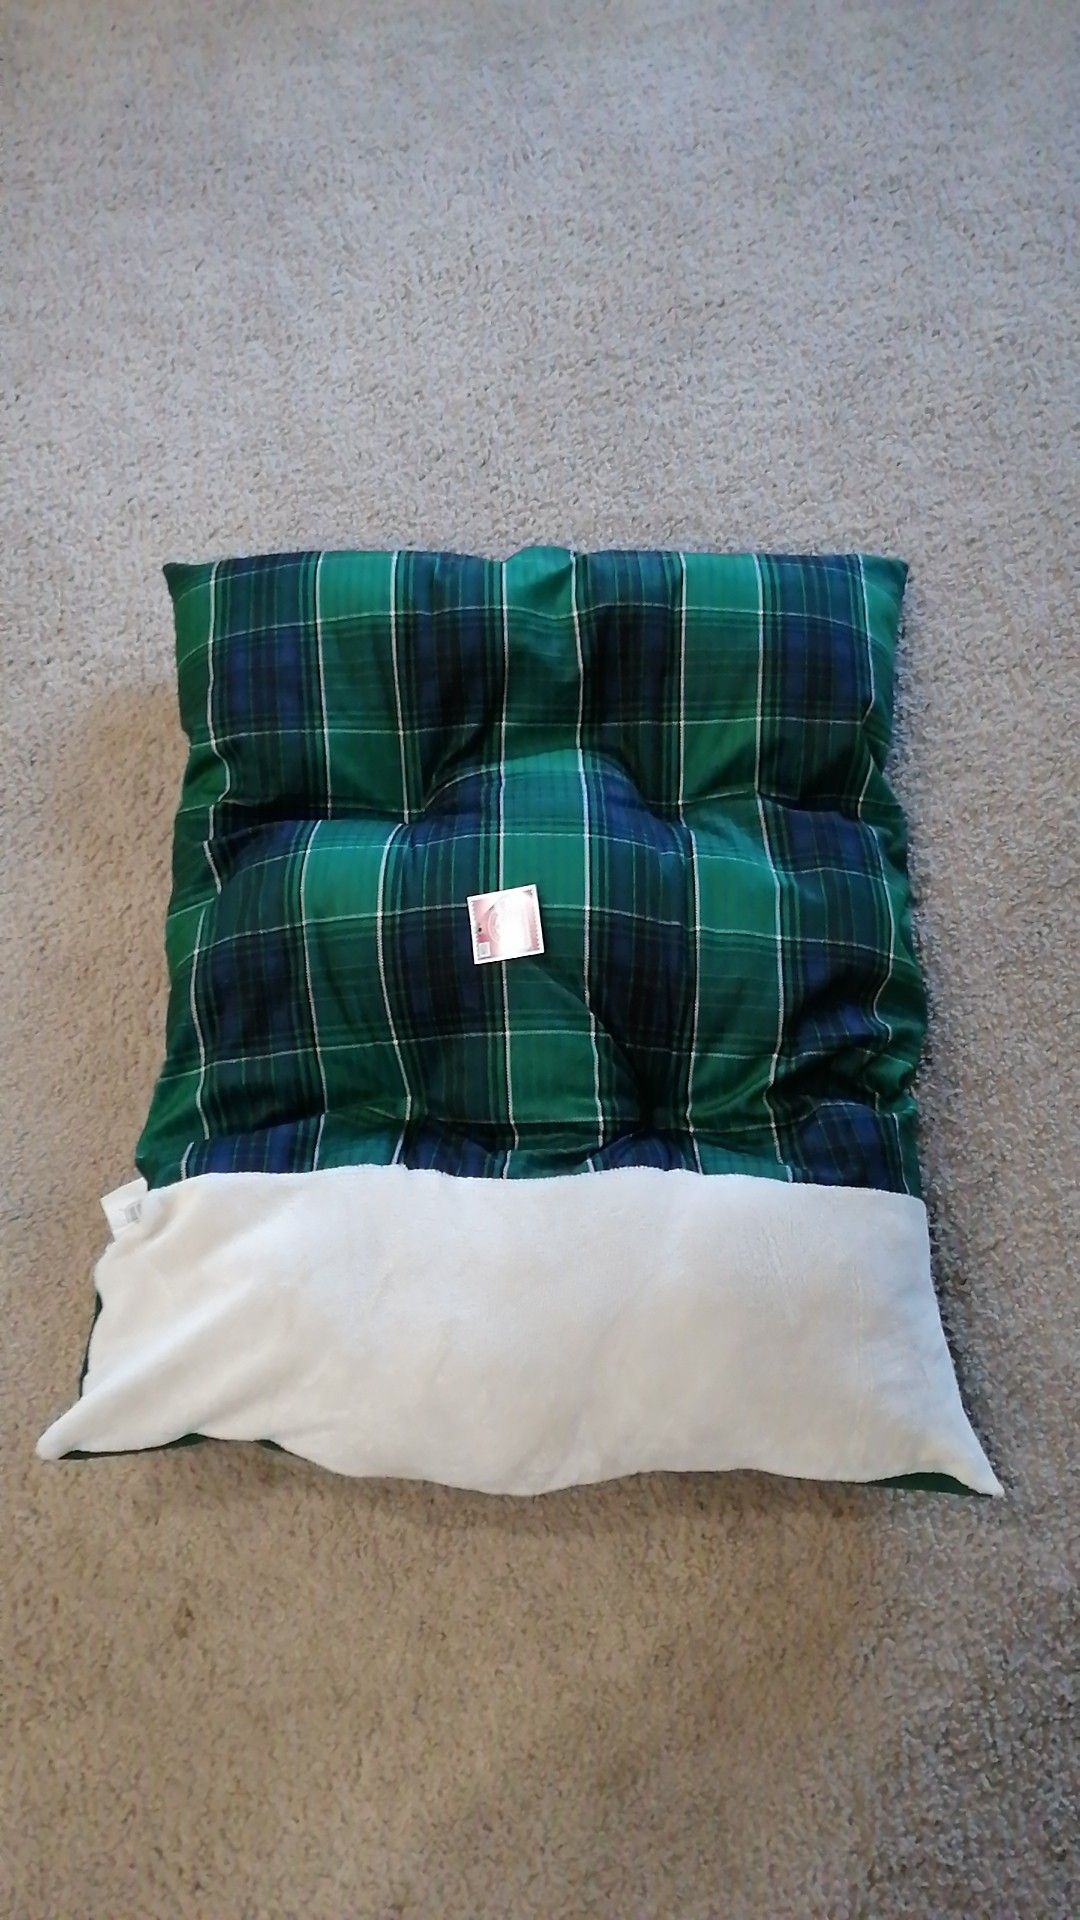 NEW large Dog Bed great for car truck house cat doggy home